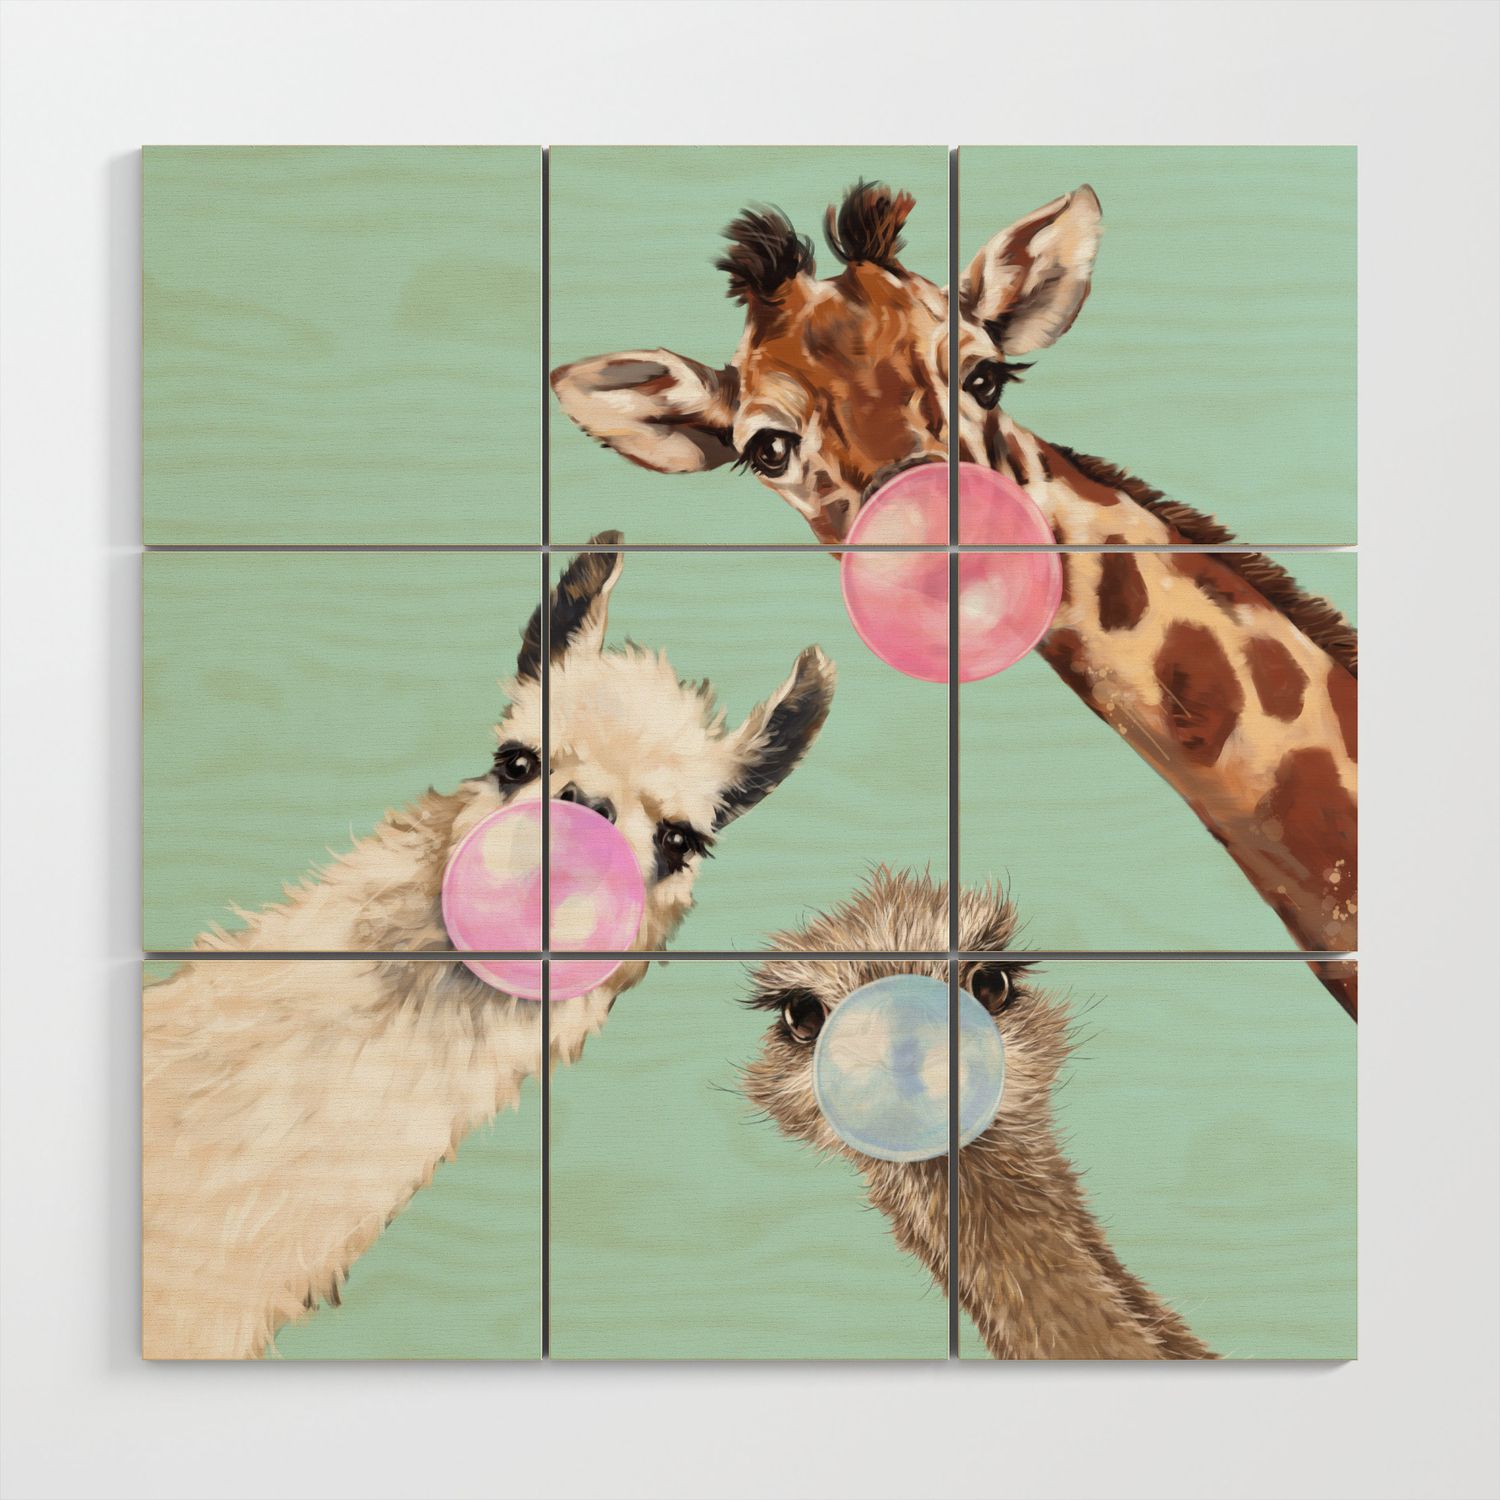 Bubble Gum Gang In Green Wood Wall Artbig Nose Work | Society6 Intended For Recent Bubble Gum Wood Wall Art (View 5 of 20)